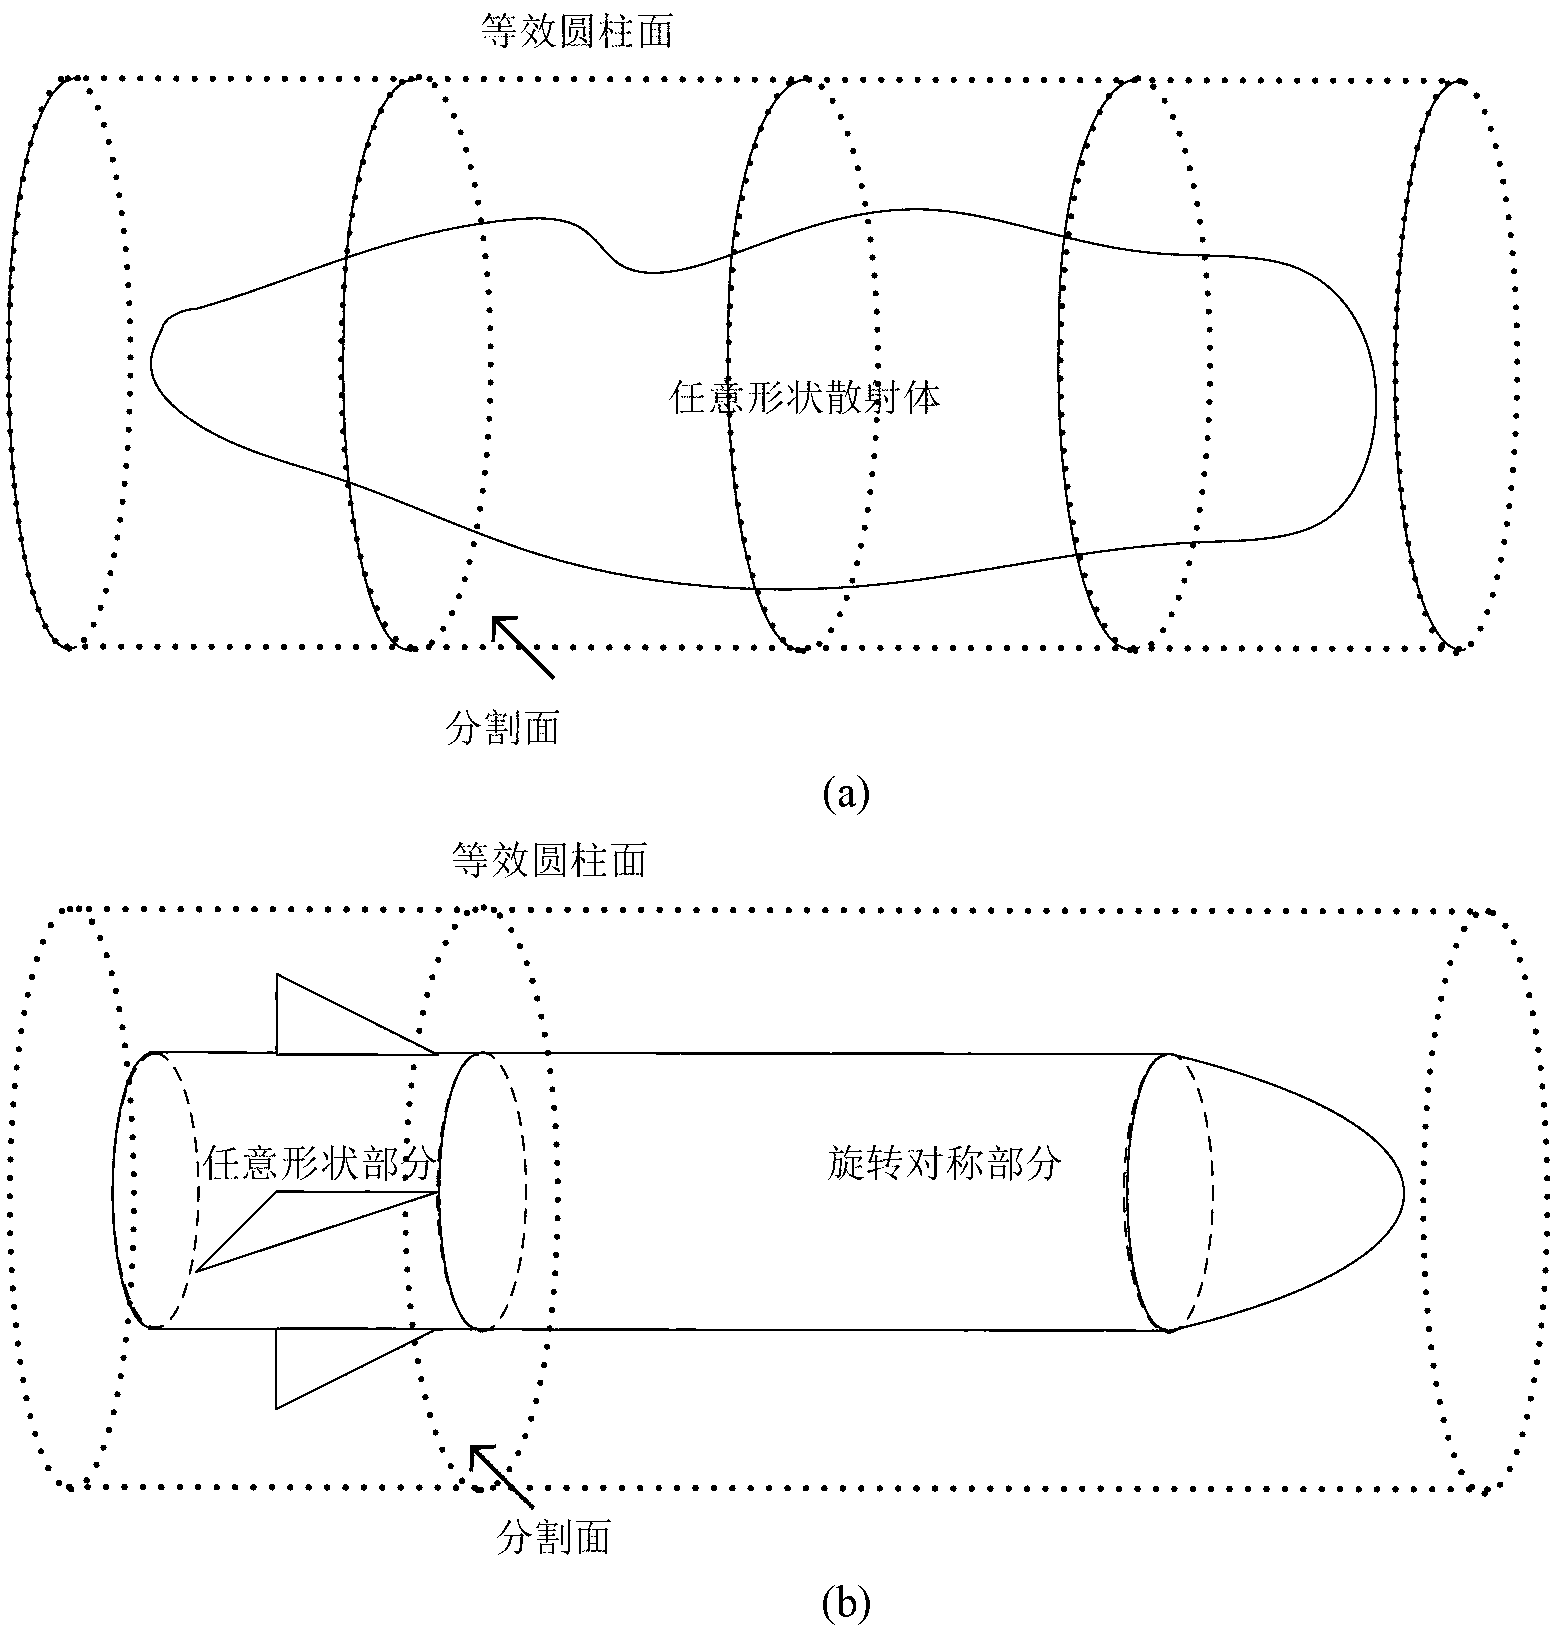 Electromagnetic scattering property simulating method based on cylindrical surface equivalent source domain decomposition